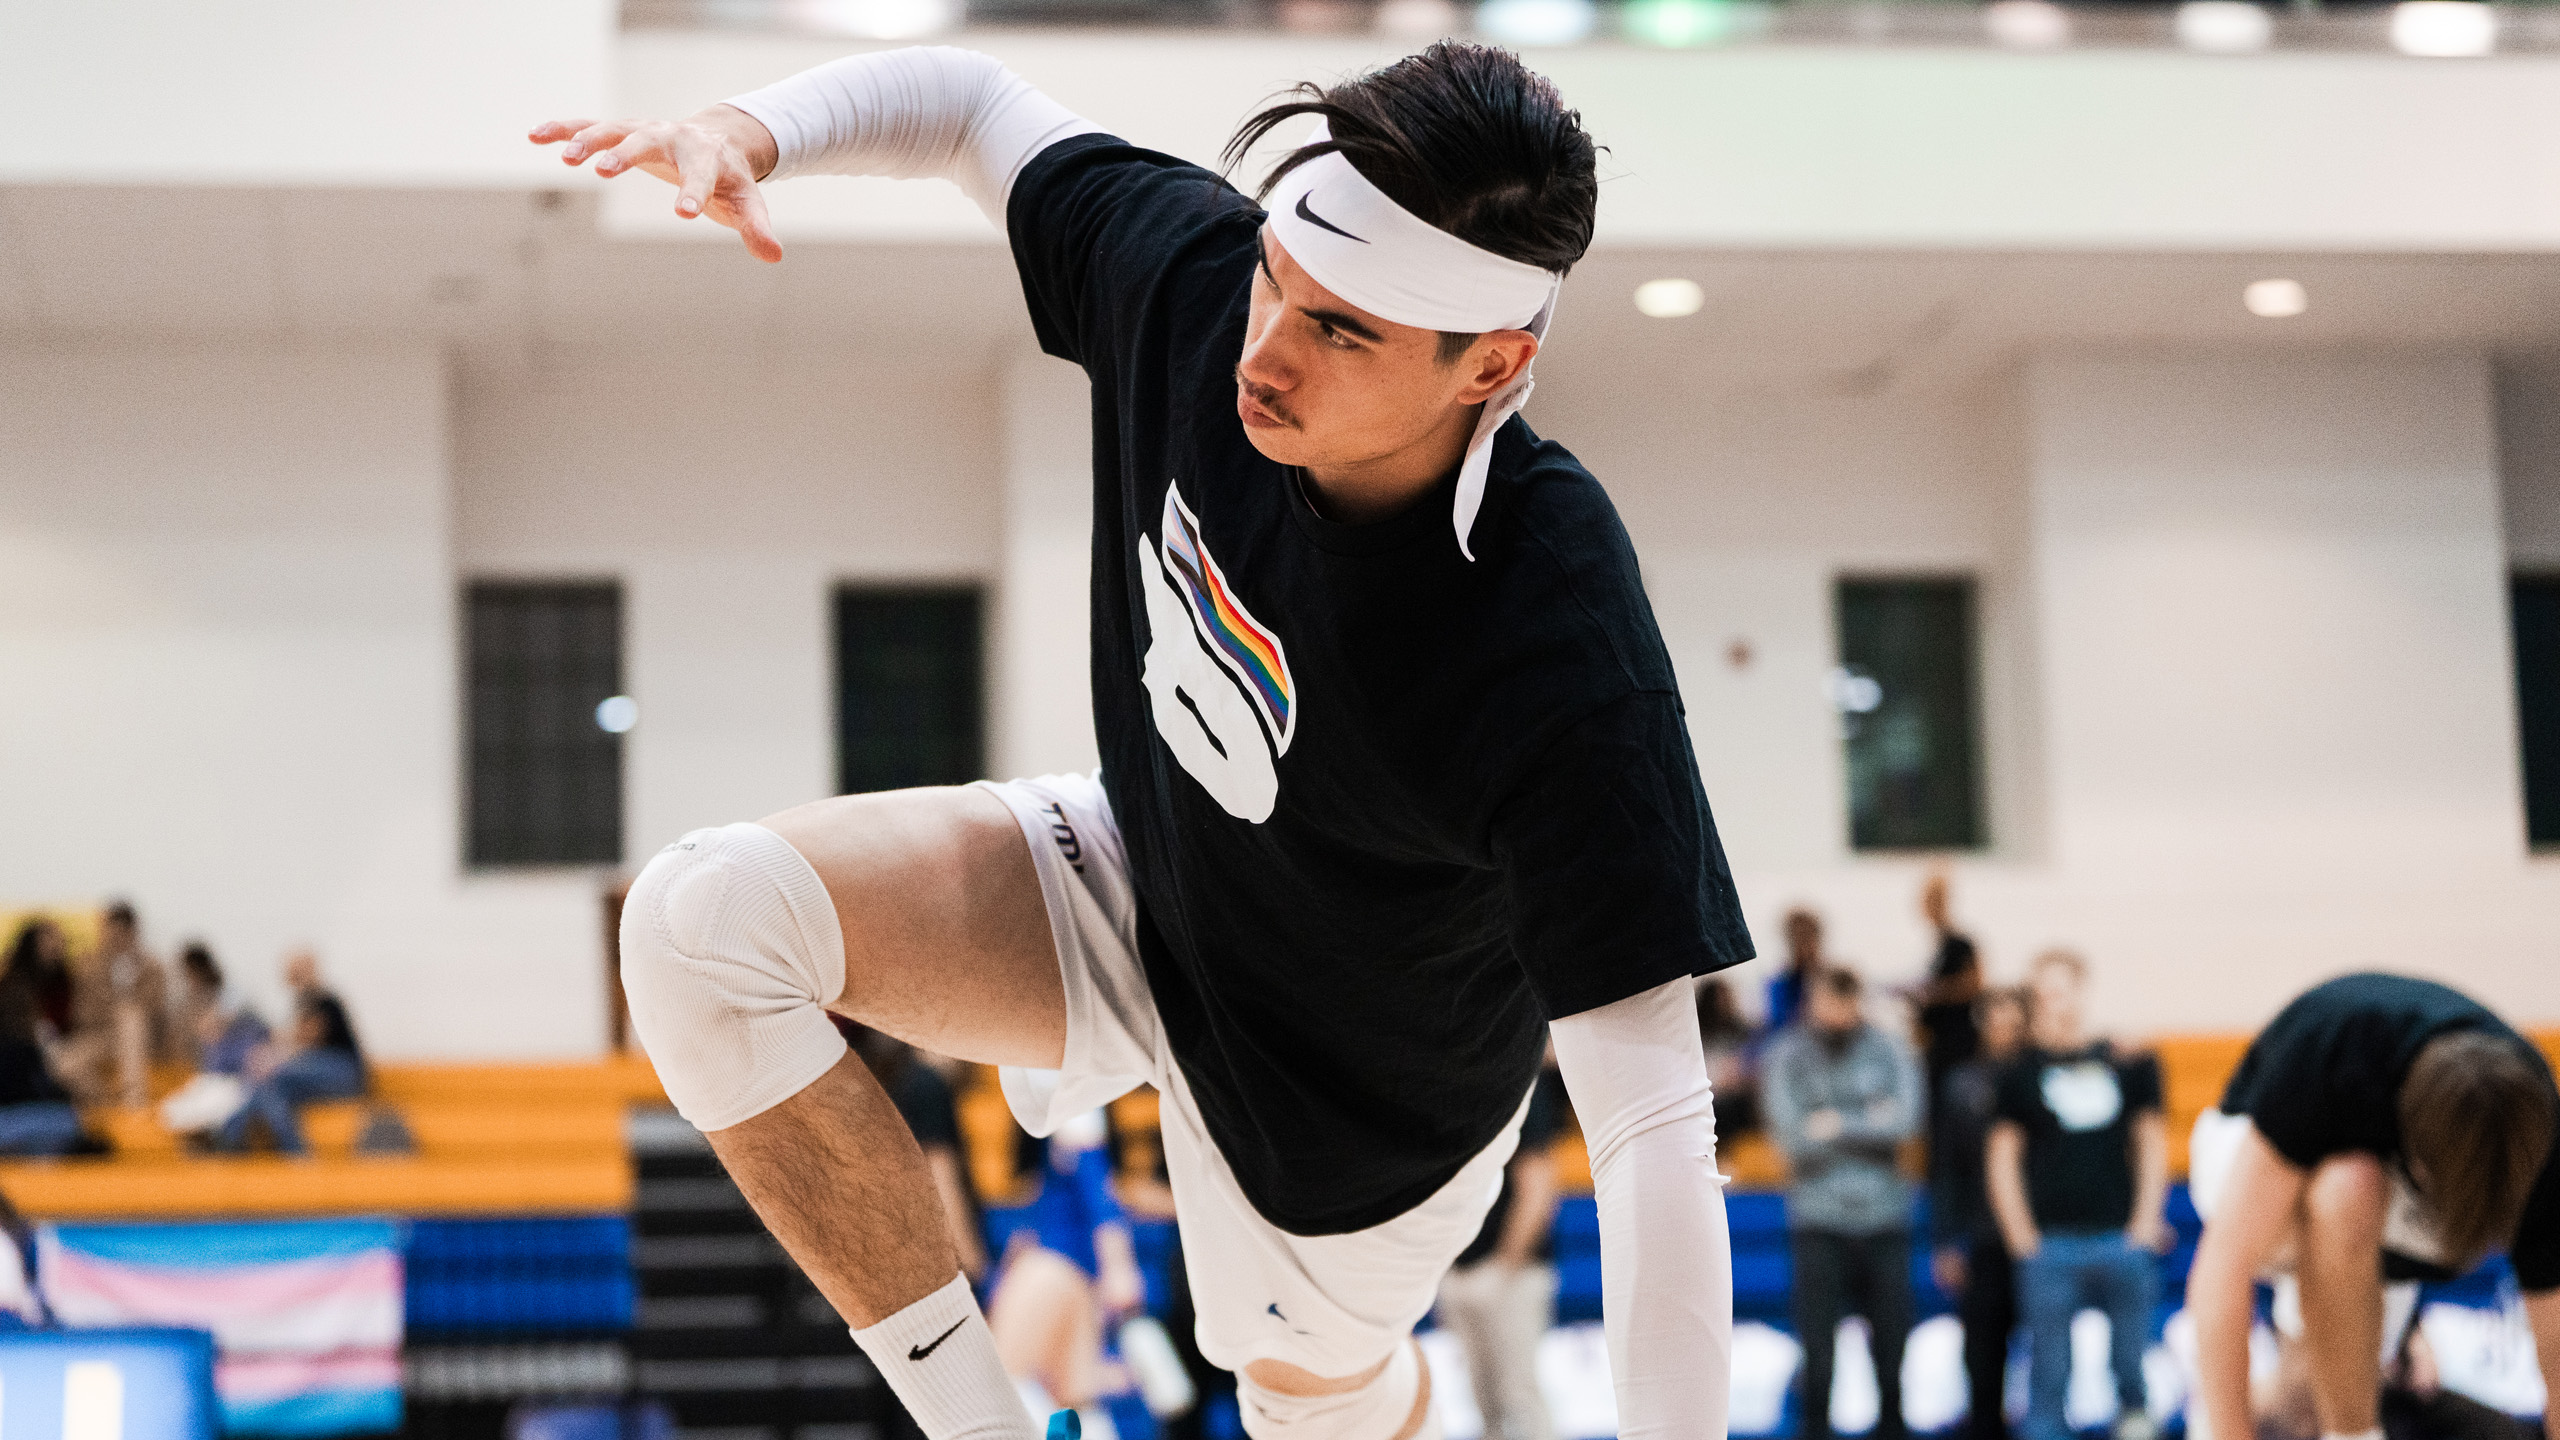 TMU men's volleyball player Lucas Yang stretches during warmups wearing the Bold Pride shirt